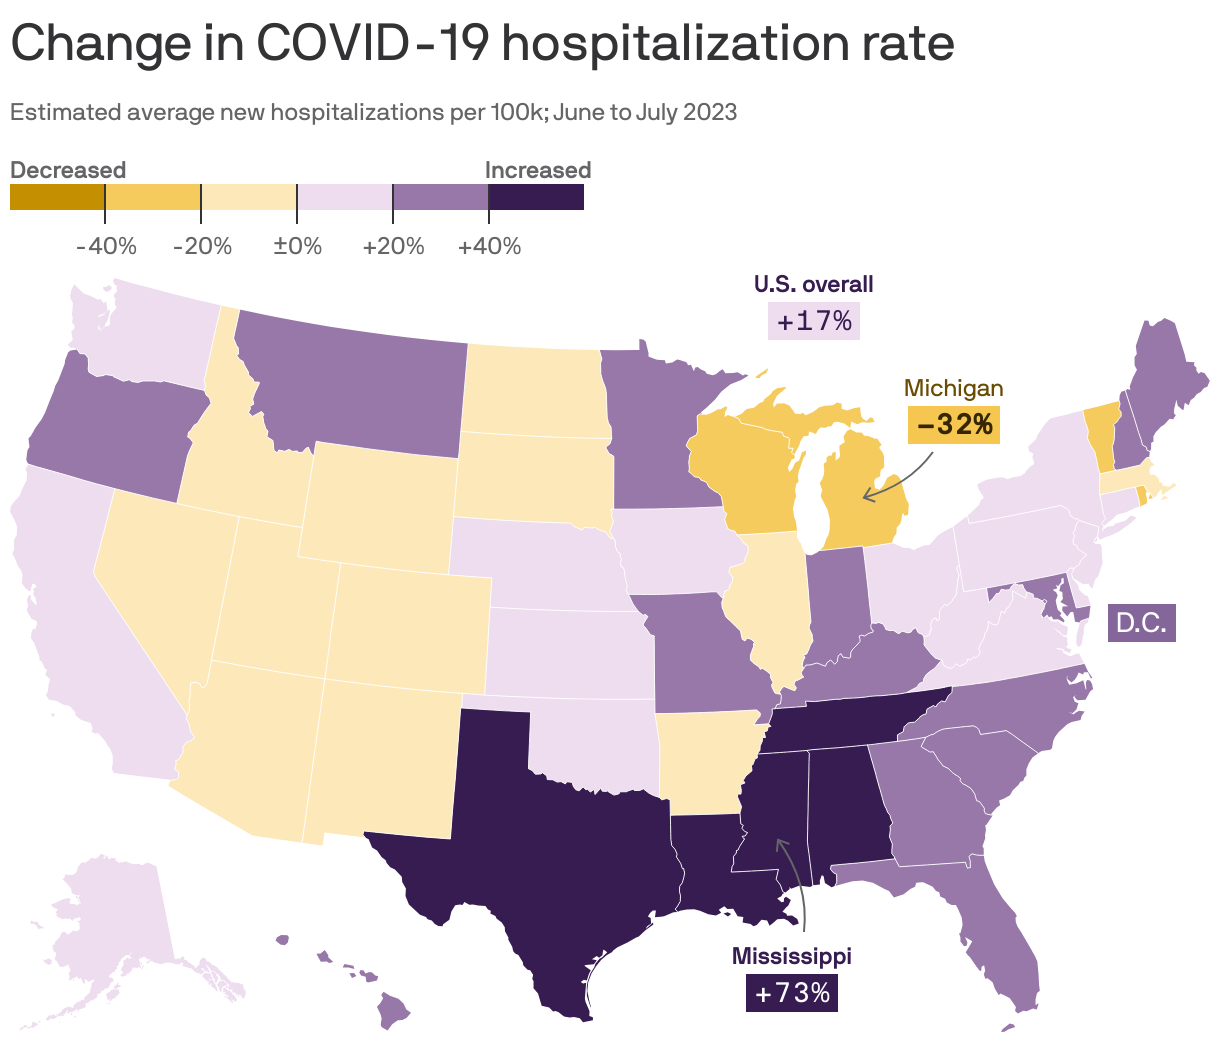 Change in COVID-19 hospitalization rate